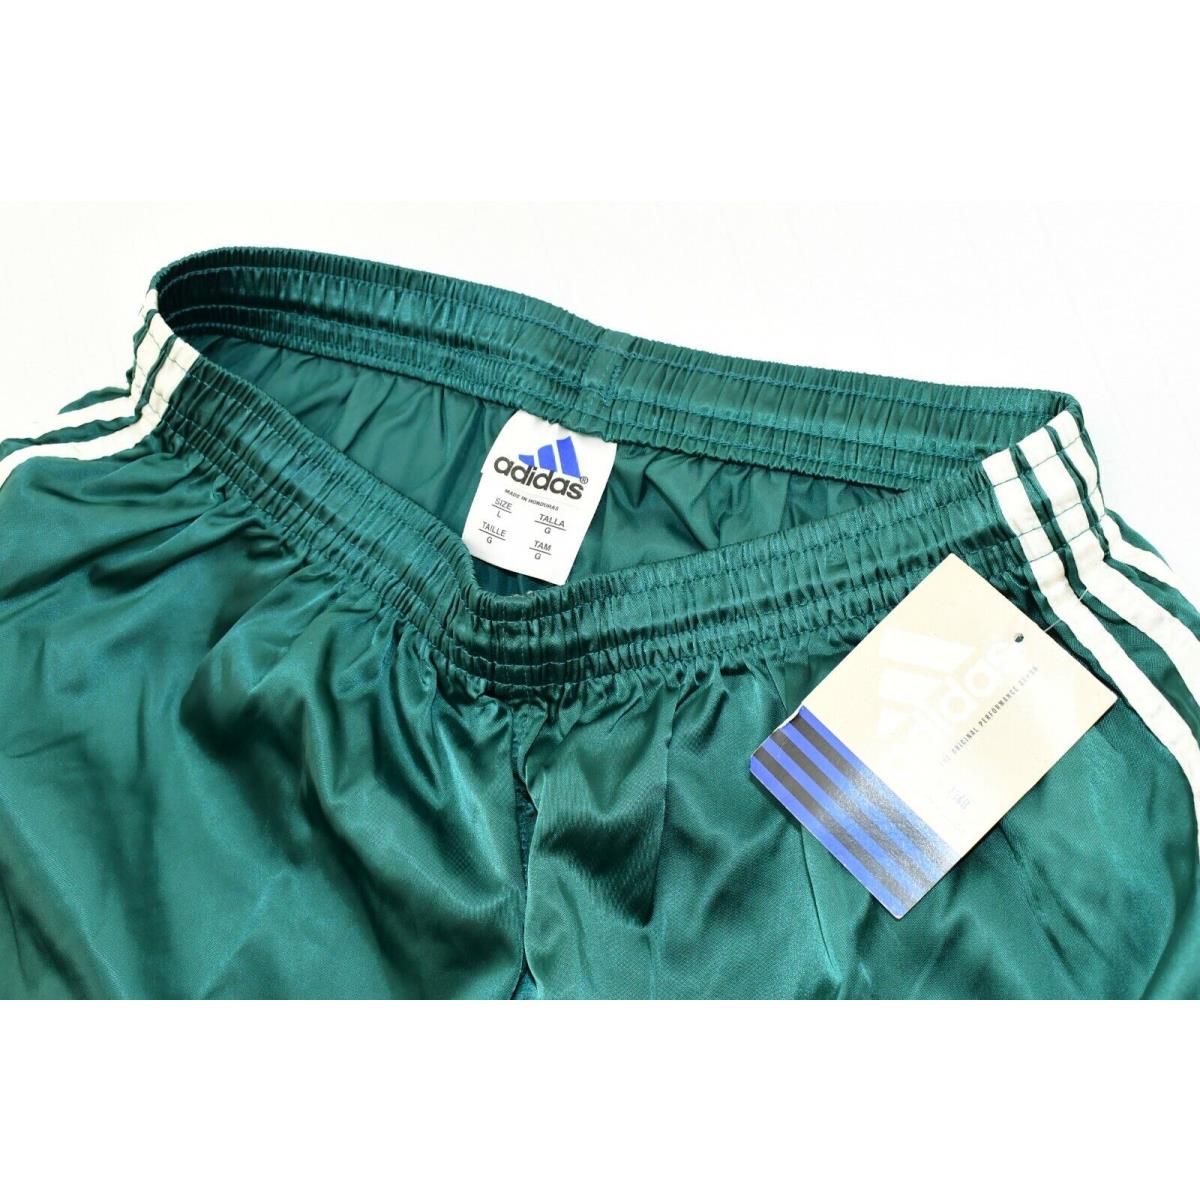 Adidas clothing  - Satin Forest Green / White 0